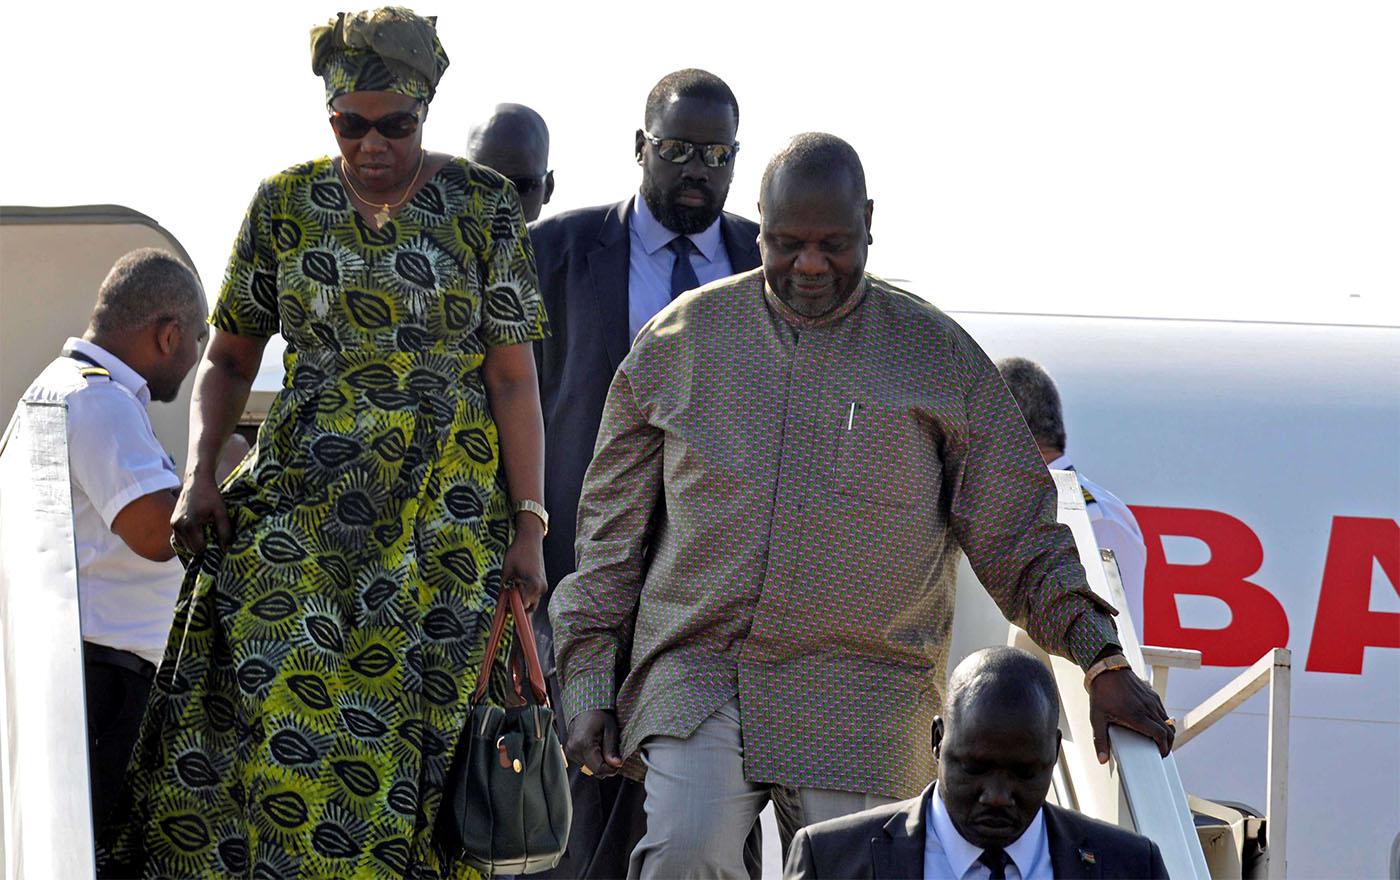 South Sudan rebel leader Riek Machar and his wife Angelina Teny disembark from the plane after arriving at Juba airport in South Sudan